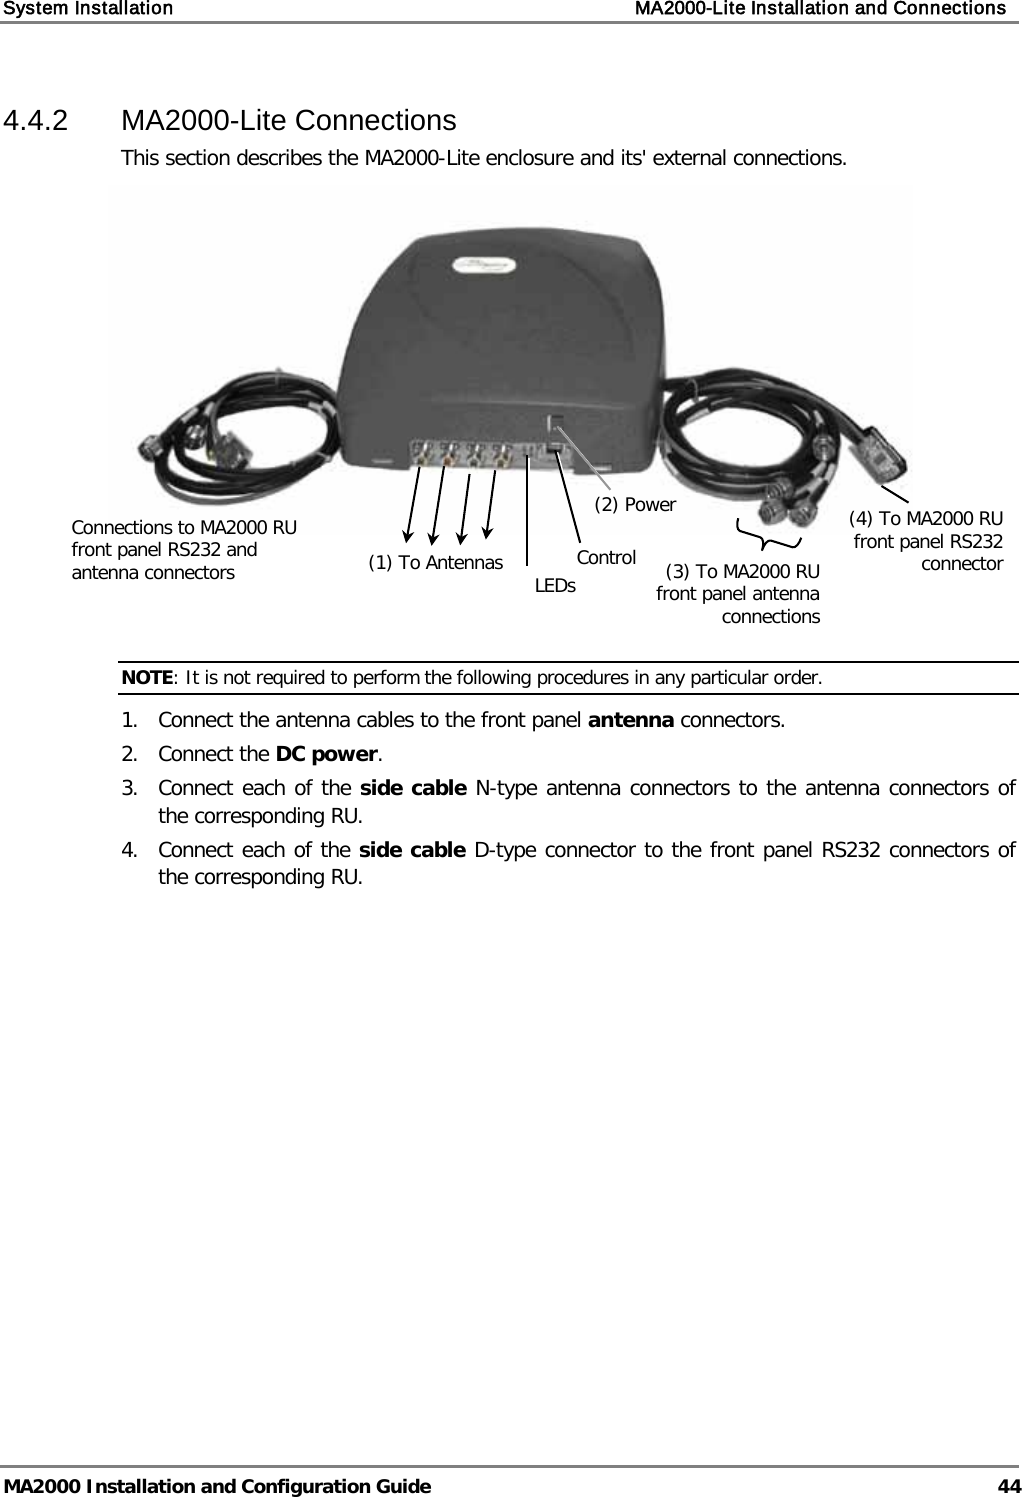 System Installation    MA2000-Lite Installation and Connections   MA2000 Installation and Configuration Guide  44 4.4.2  MA2000-Lite Connections  This section describes the MA2000-Lite enclosure and its&apos; external connections.     NOTE: It is not required to perform the following procedures in any particular order. 1.  Connect the antenna cables to the front panel antenna connectors. 2.  Connect the DC power. 3.  Connect each of the side cable N-type antenna connectors to the antenna connectors of the corresponding RU. 4.  Connect each of the side cable D-type connector to the front panel RS232 connectors of the corresponding RU. Connections to MA2000 RU front panel RS232 and antenna connectors (1) To Antennas (2) Power   LEDs  Control  (4) To MA2000 RU  front panel RS232 connector  (3) To MA2000 RU front panel antenna connections  